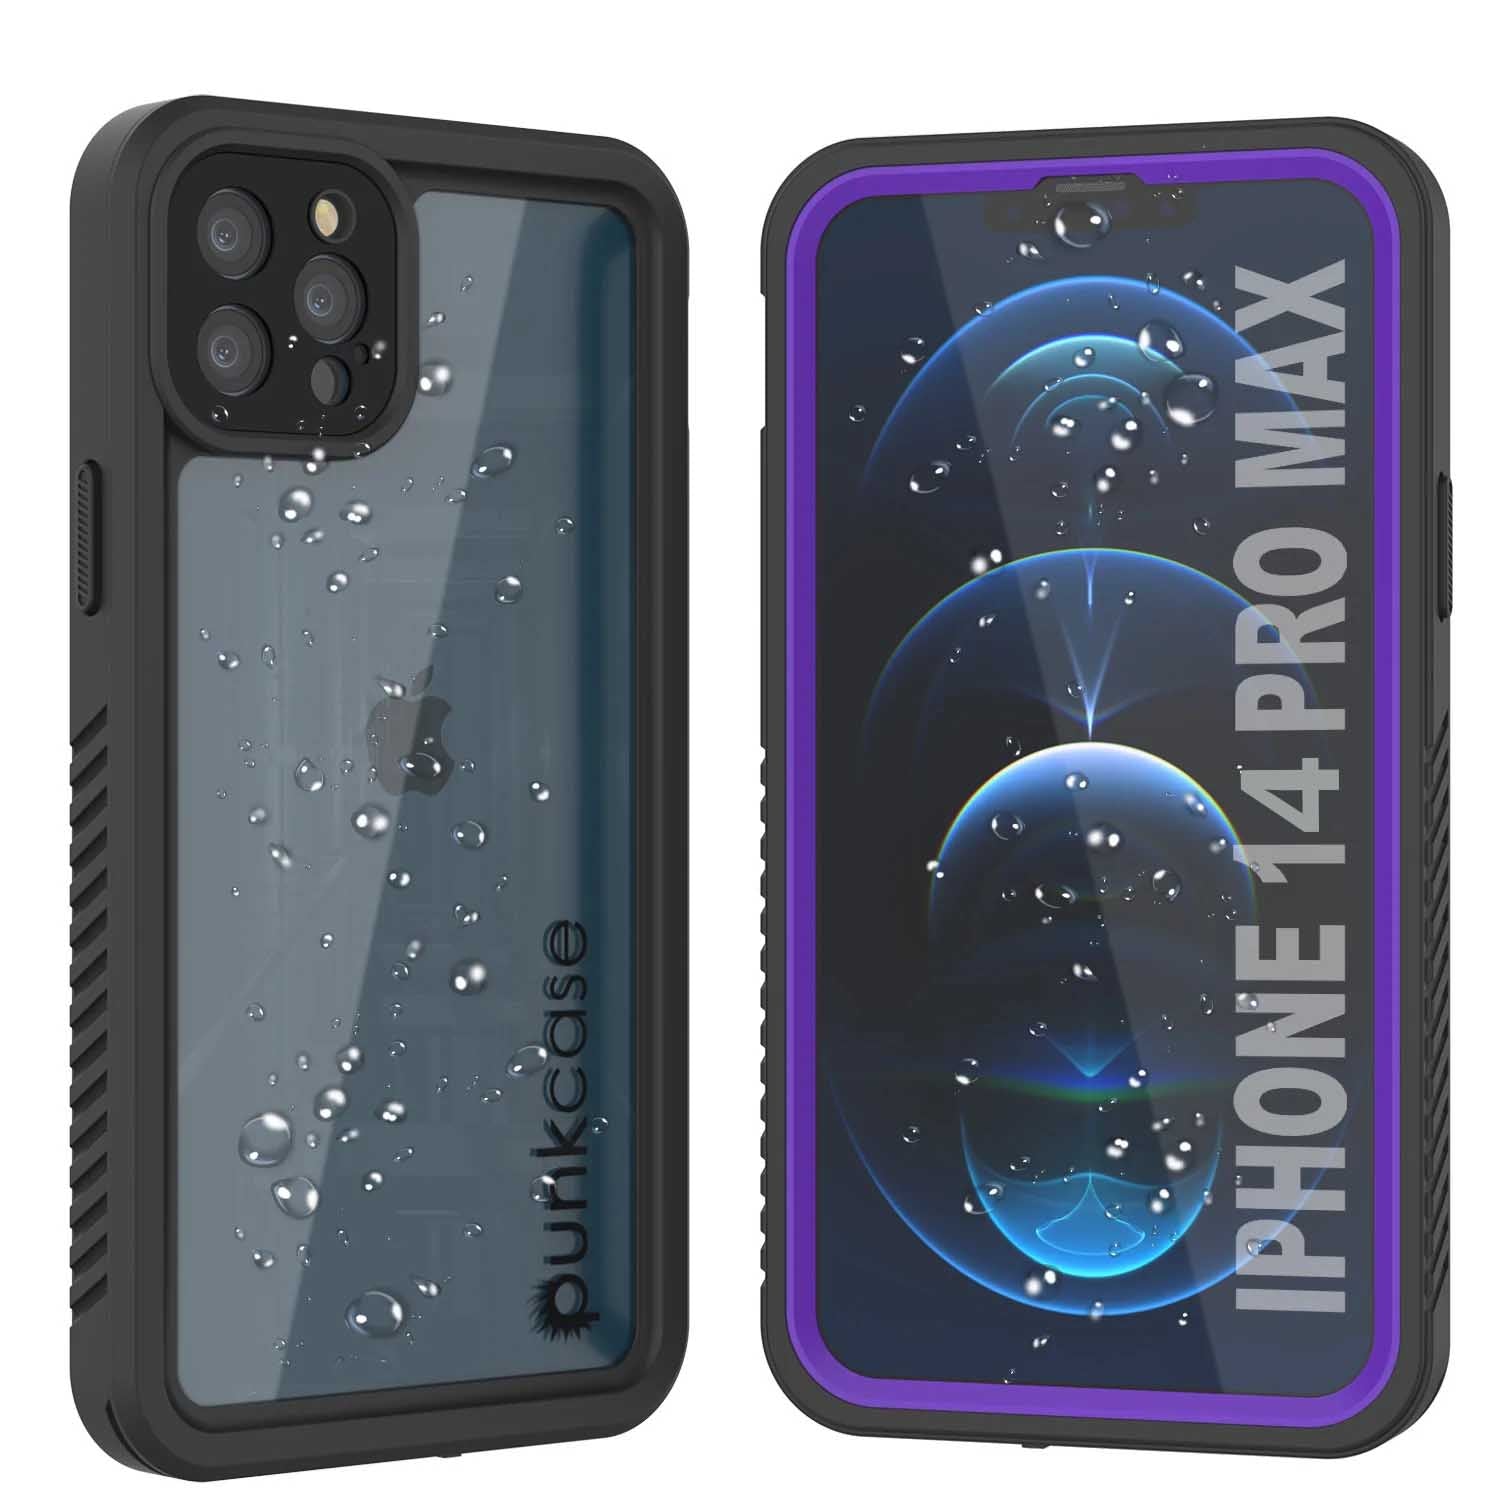 iPhone 14 Pro Max Waterproof Case, Punkcase [Extreme Series] Armor Cover W/ Built In Screen Protector [Purple]